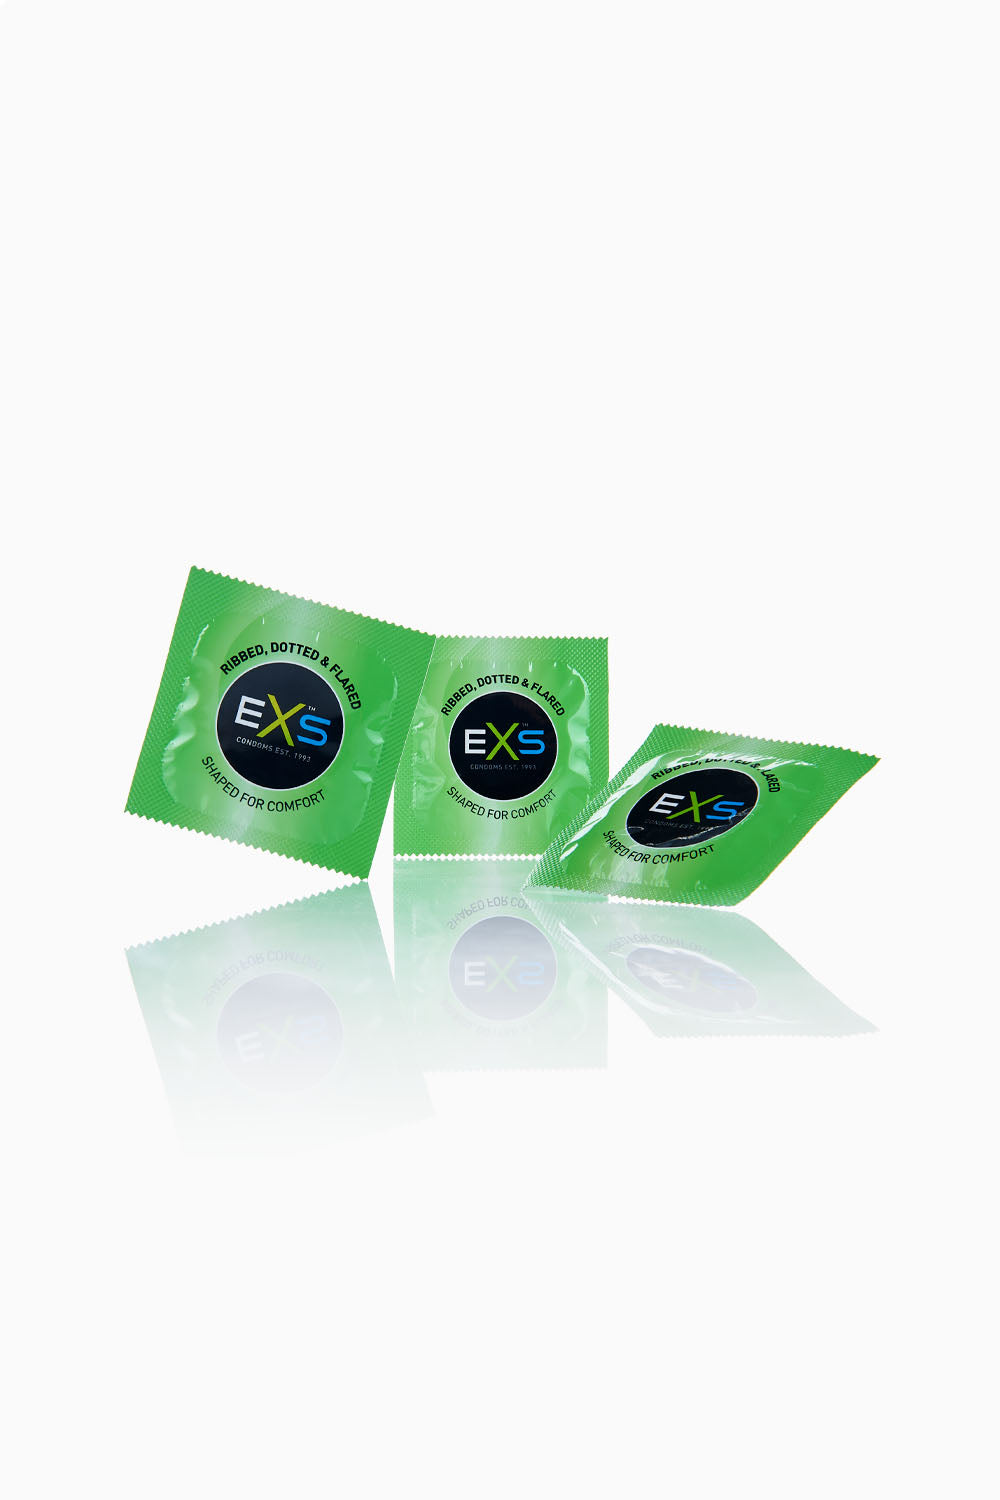 EXS Dotted, Ribbed and Flared Condoms 50 Pack